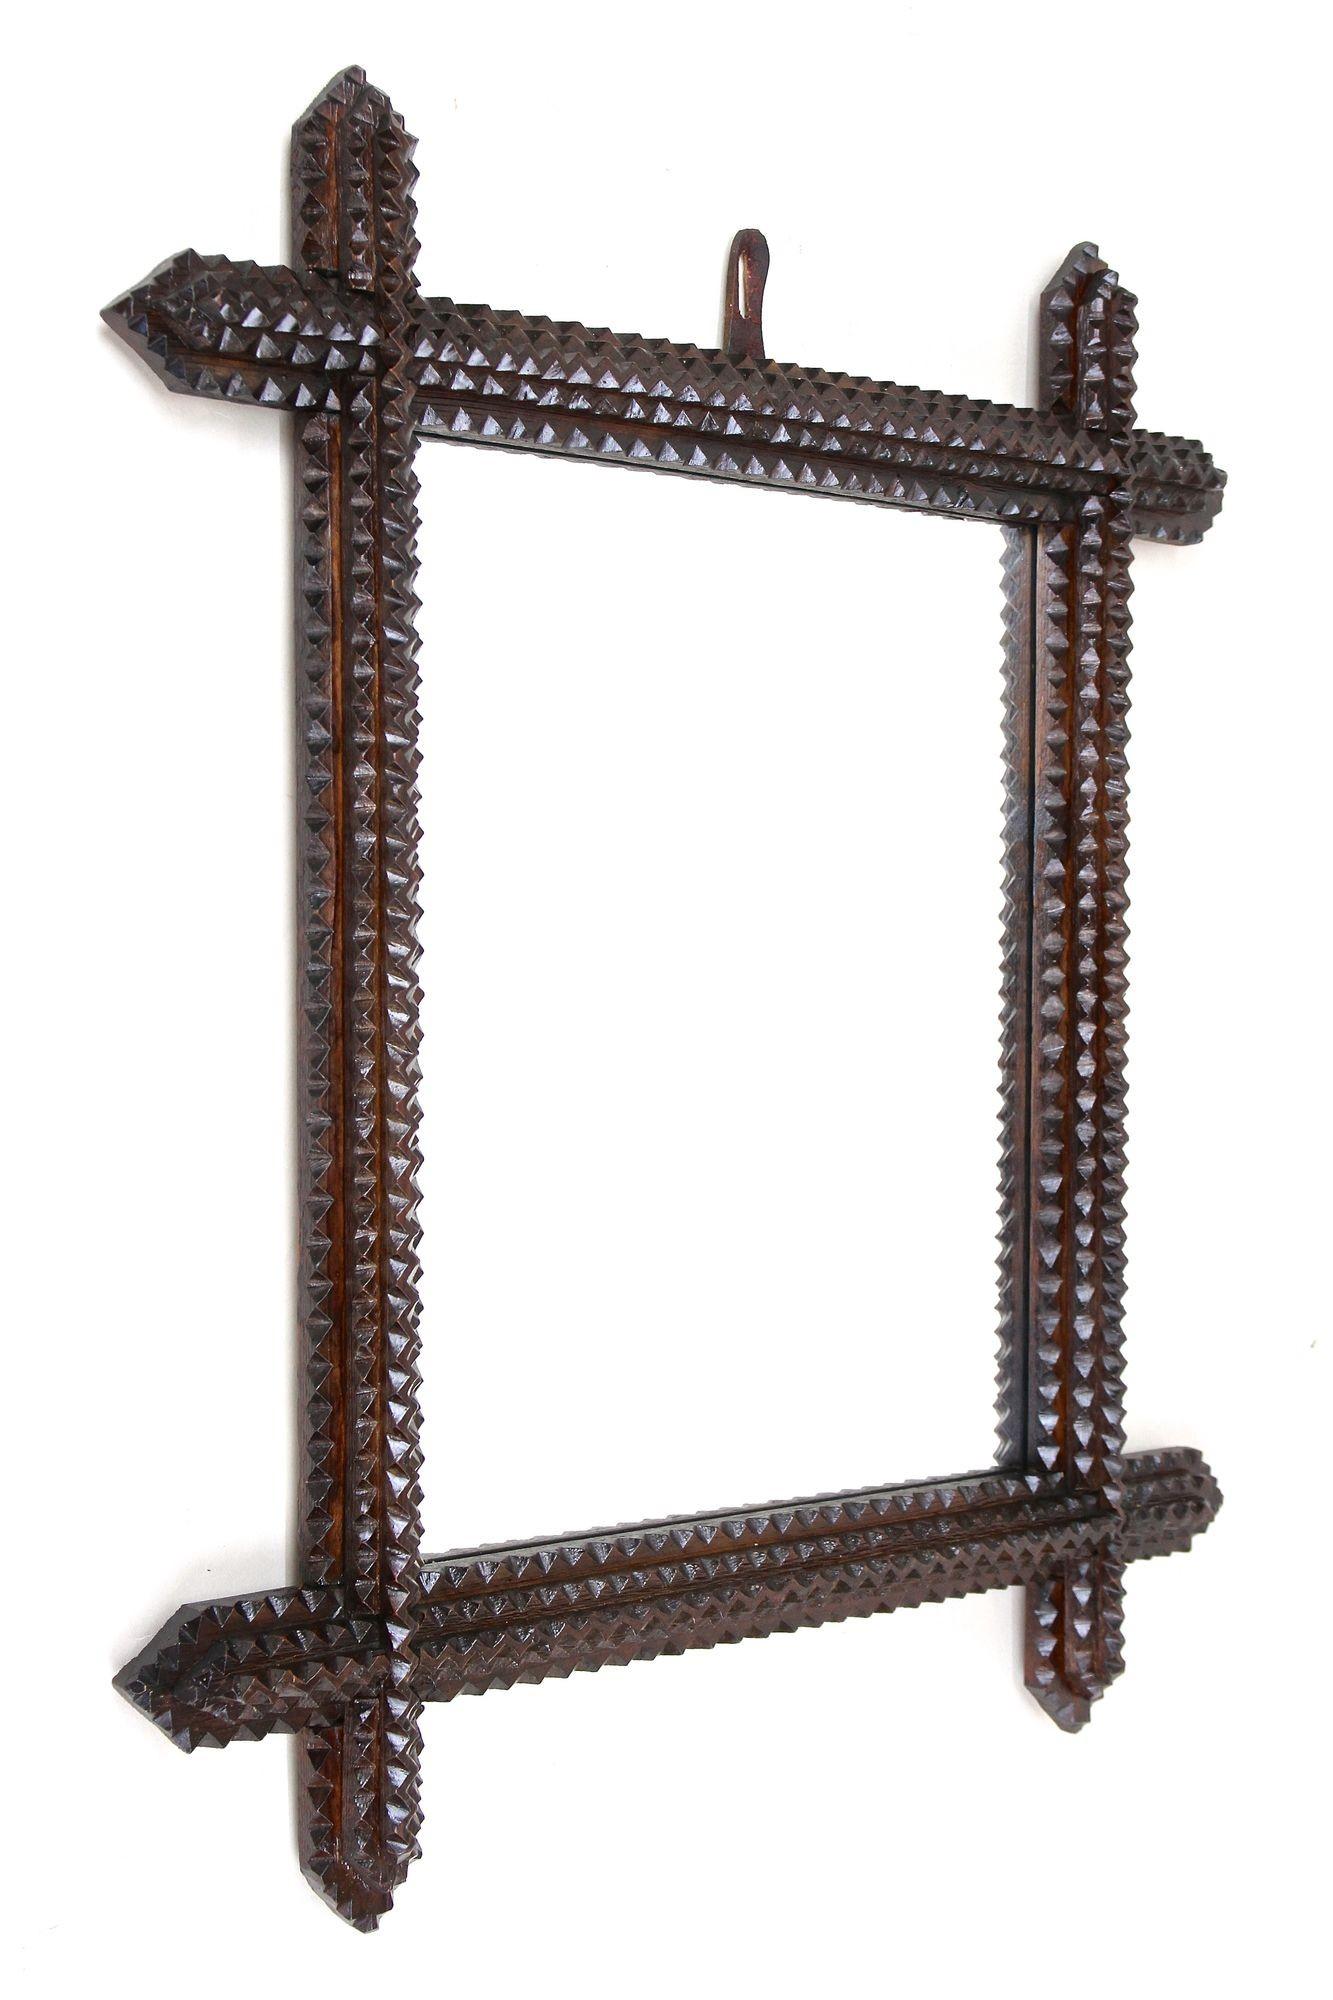 Extraordinary rustic Tramp Art wall mirror from the period around 1880 in Austria. This unique hand carved wooden mirror has been artfully crafted in the late 19th century out of basswood and shows a lovely dark brown surface finished with a